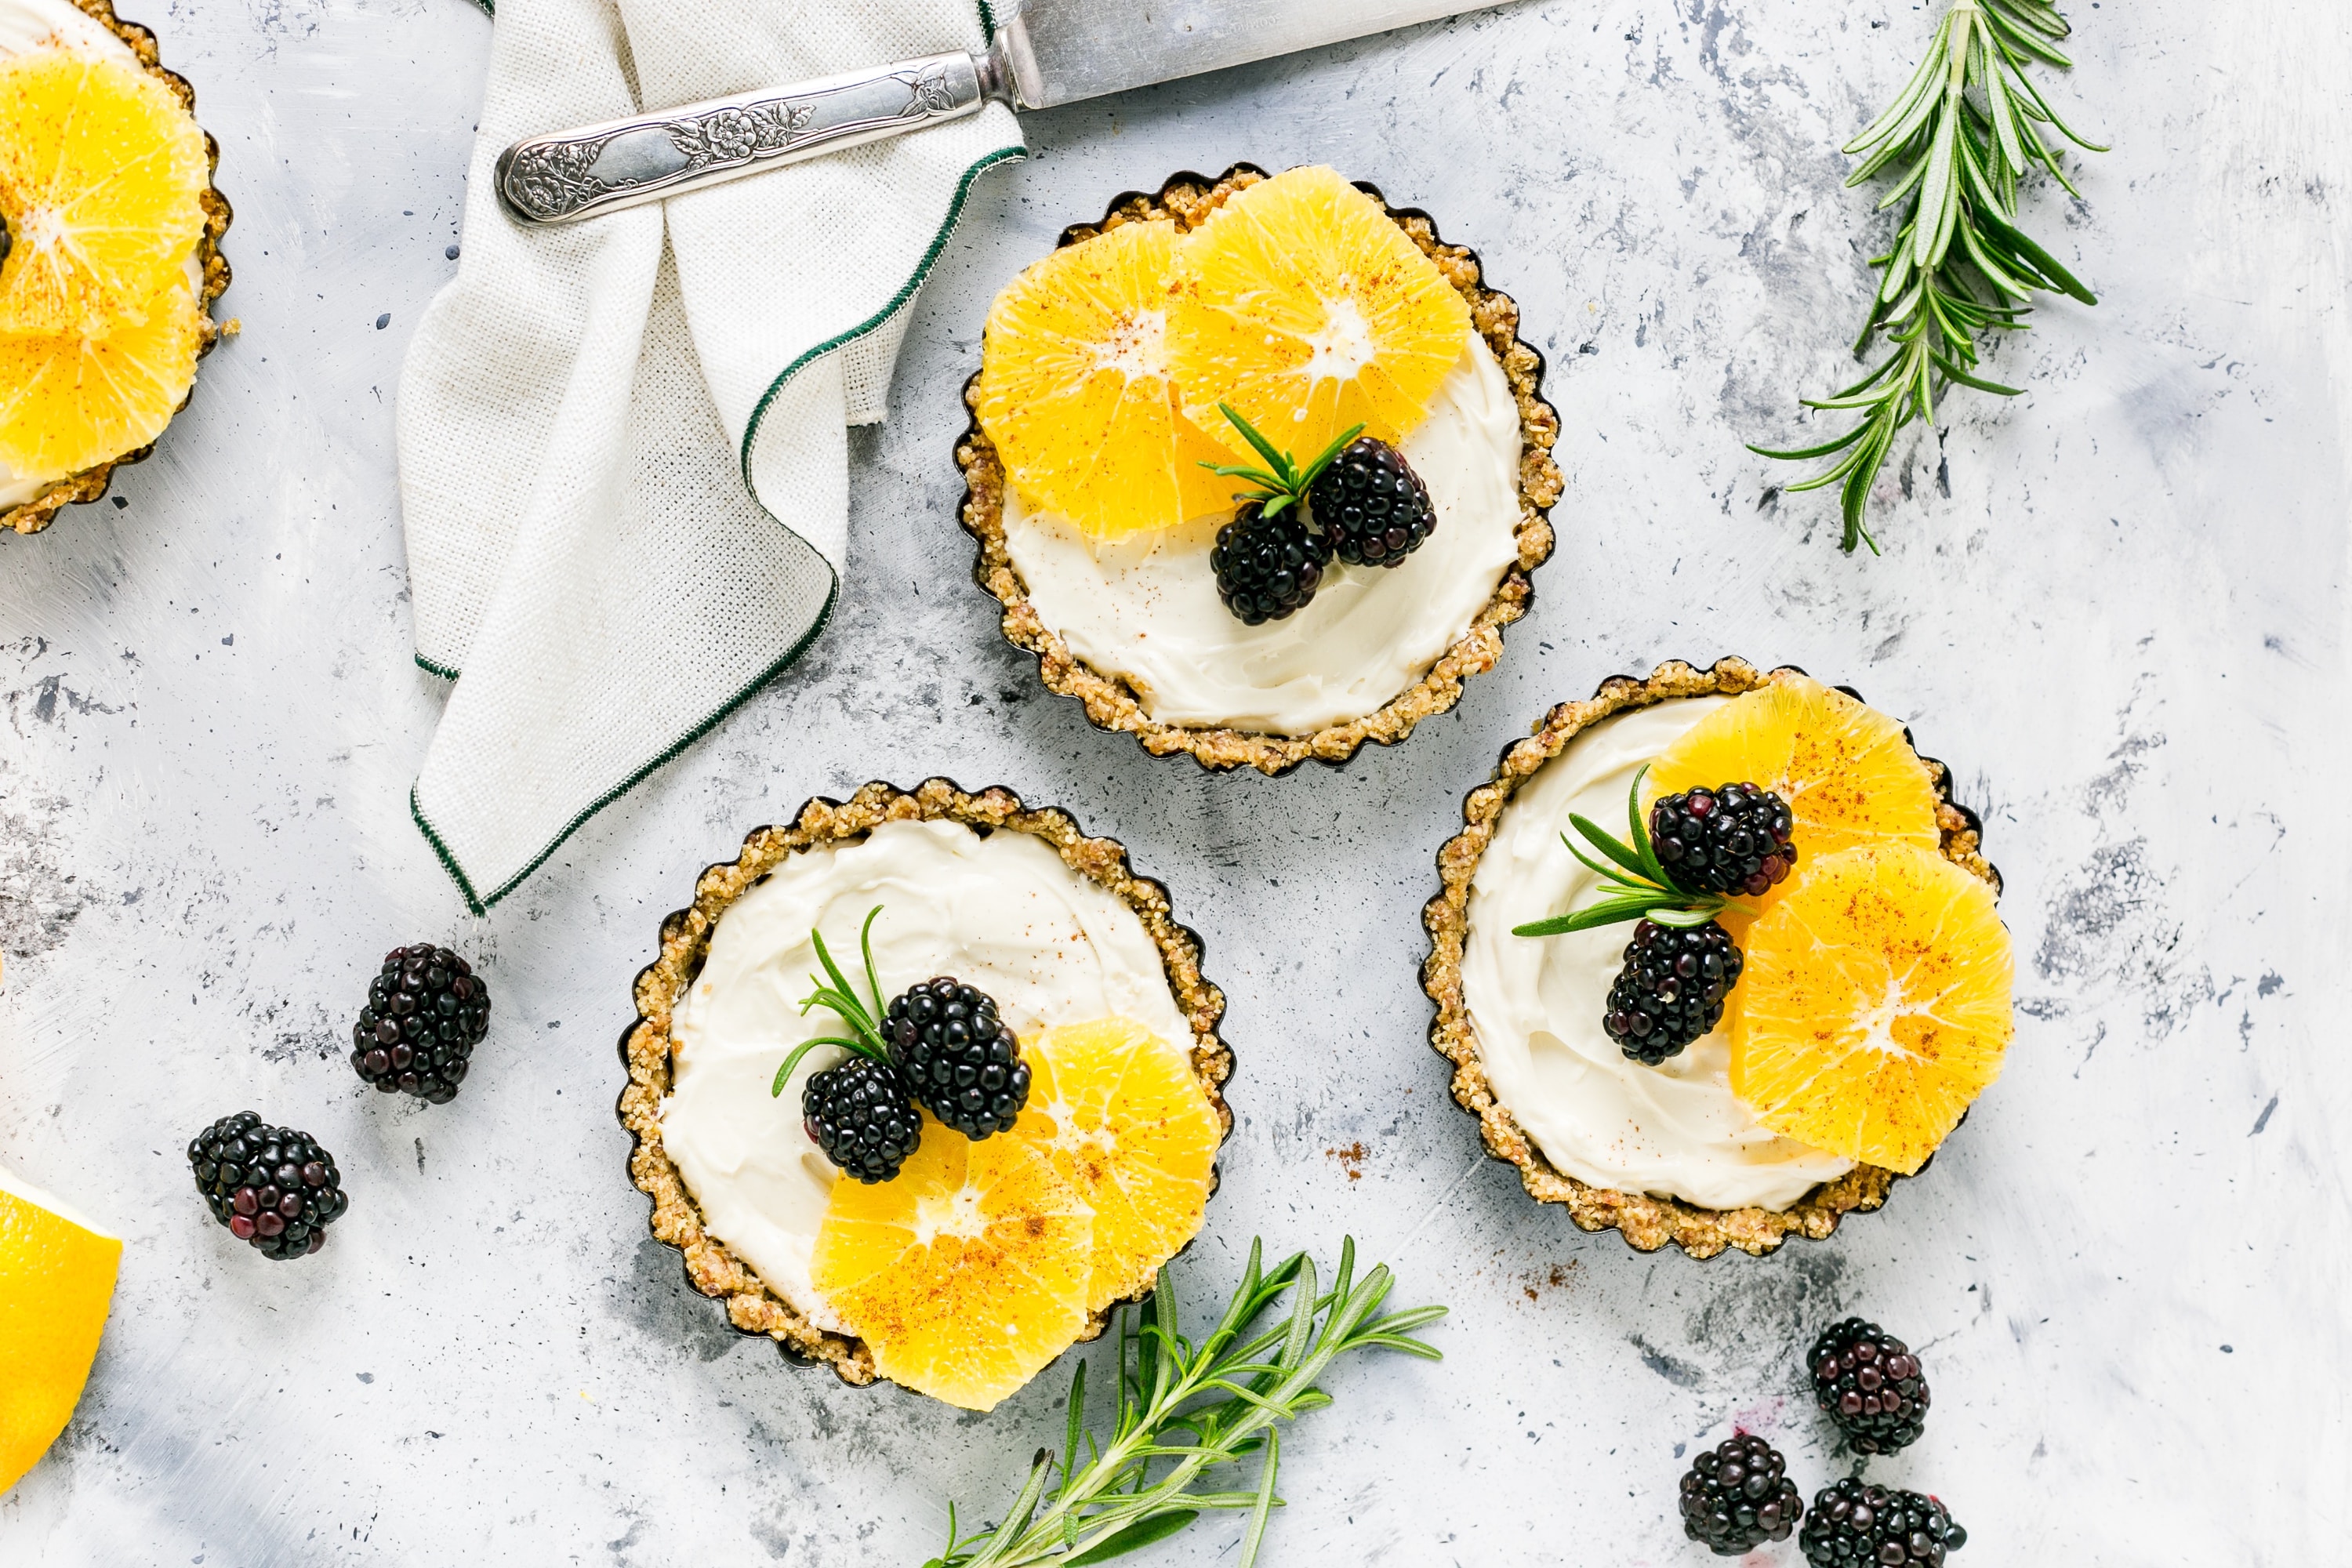 A few tarts with fresh orange and blackberries on top as garnish.